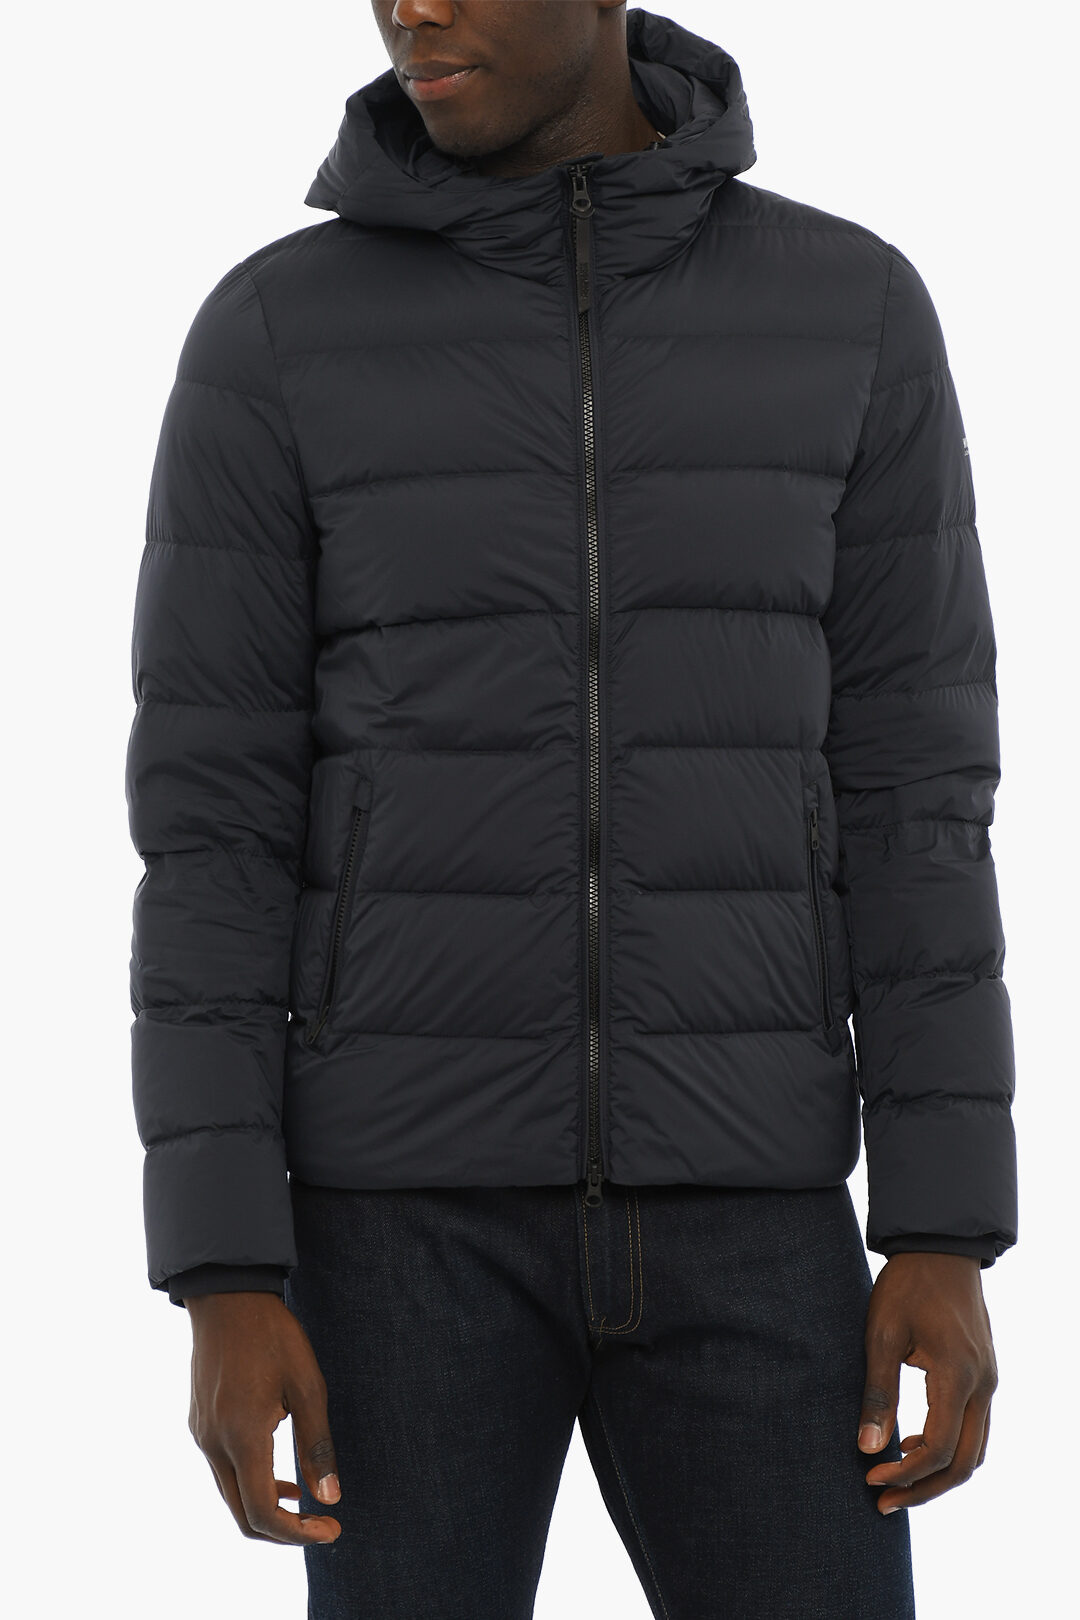 Woolrich Solid Color SIERRA Down Jacket with Hood men - Glamood Outlet